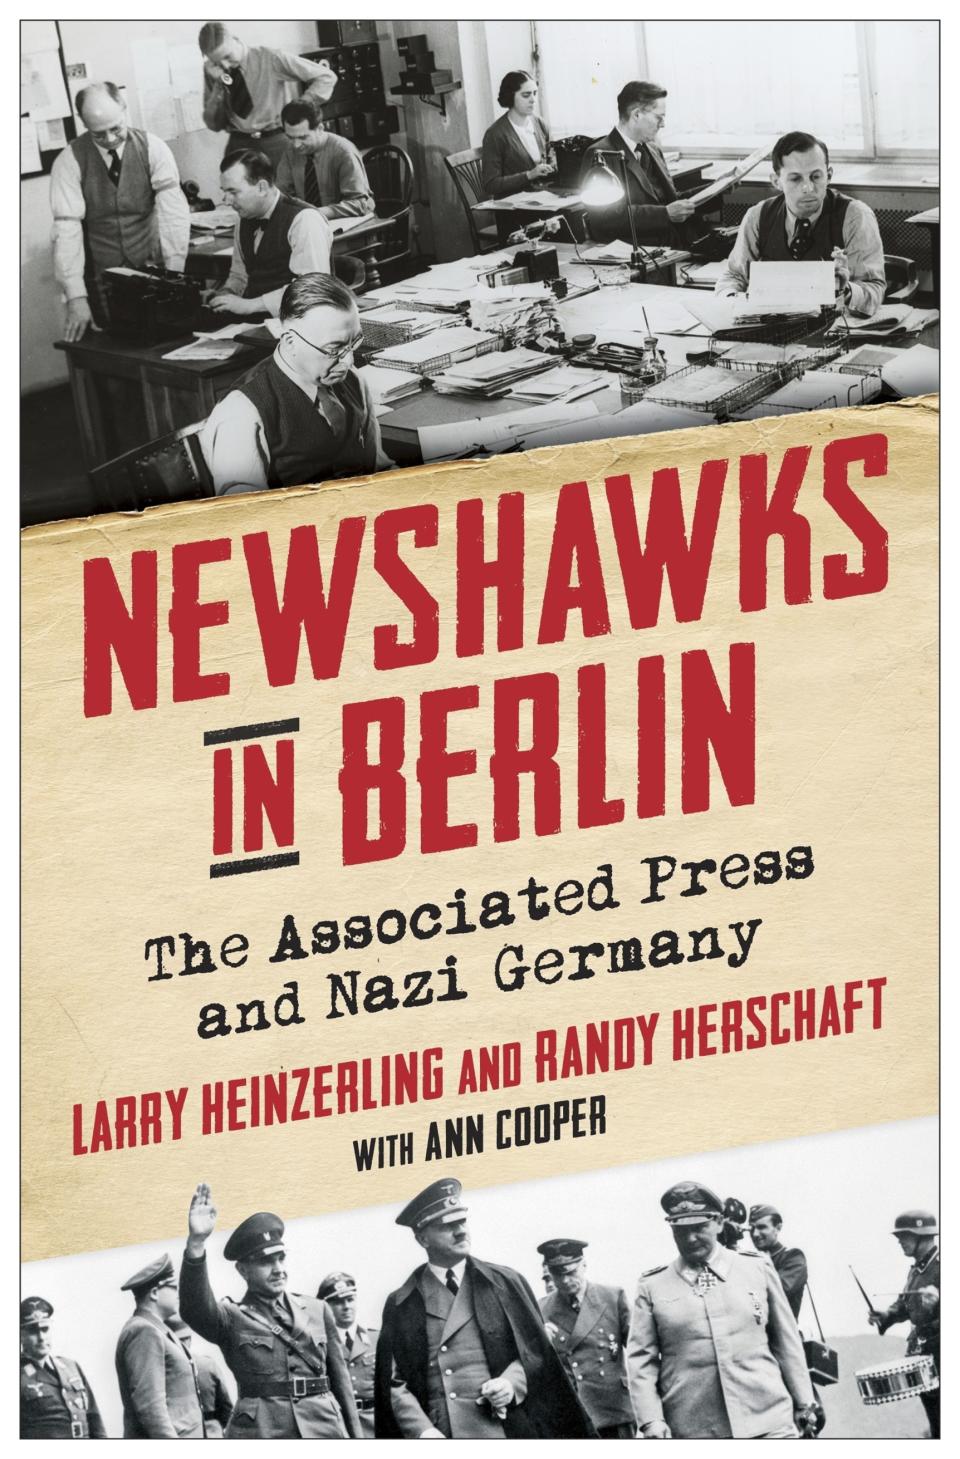 This cover image released by Columbia University Press shows "Newshawks in Berlin: The Associated Press and Nazi Germany" by Larry Heinzerling and Randy Herschaft, with Ann Cooper. (Columbia University Press via AP)